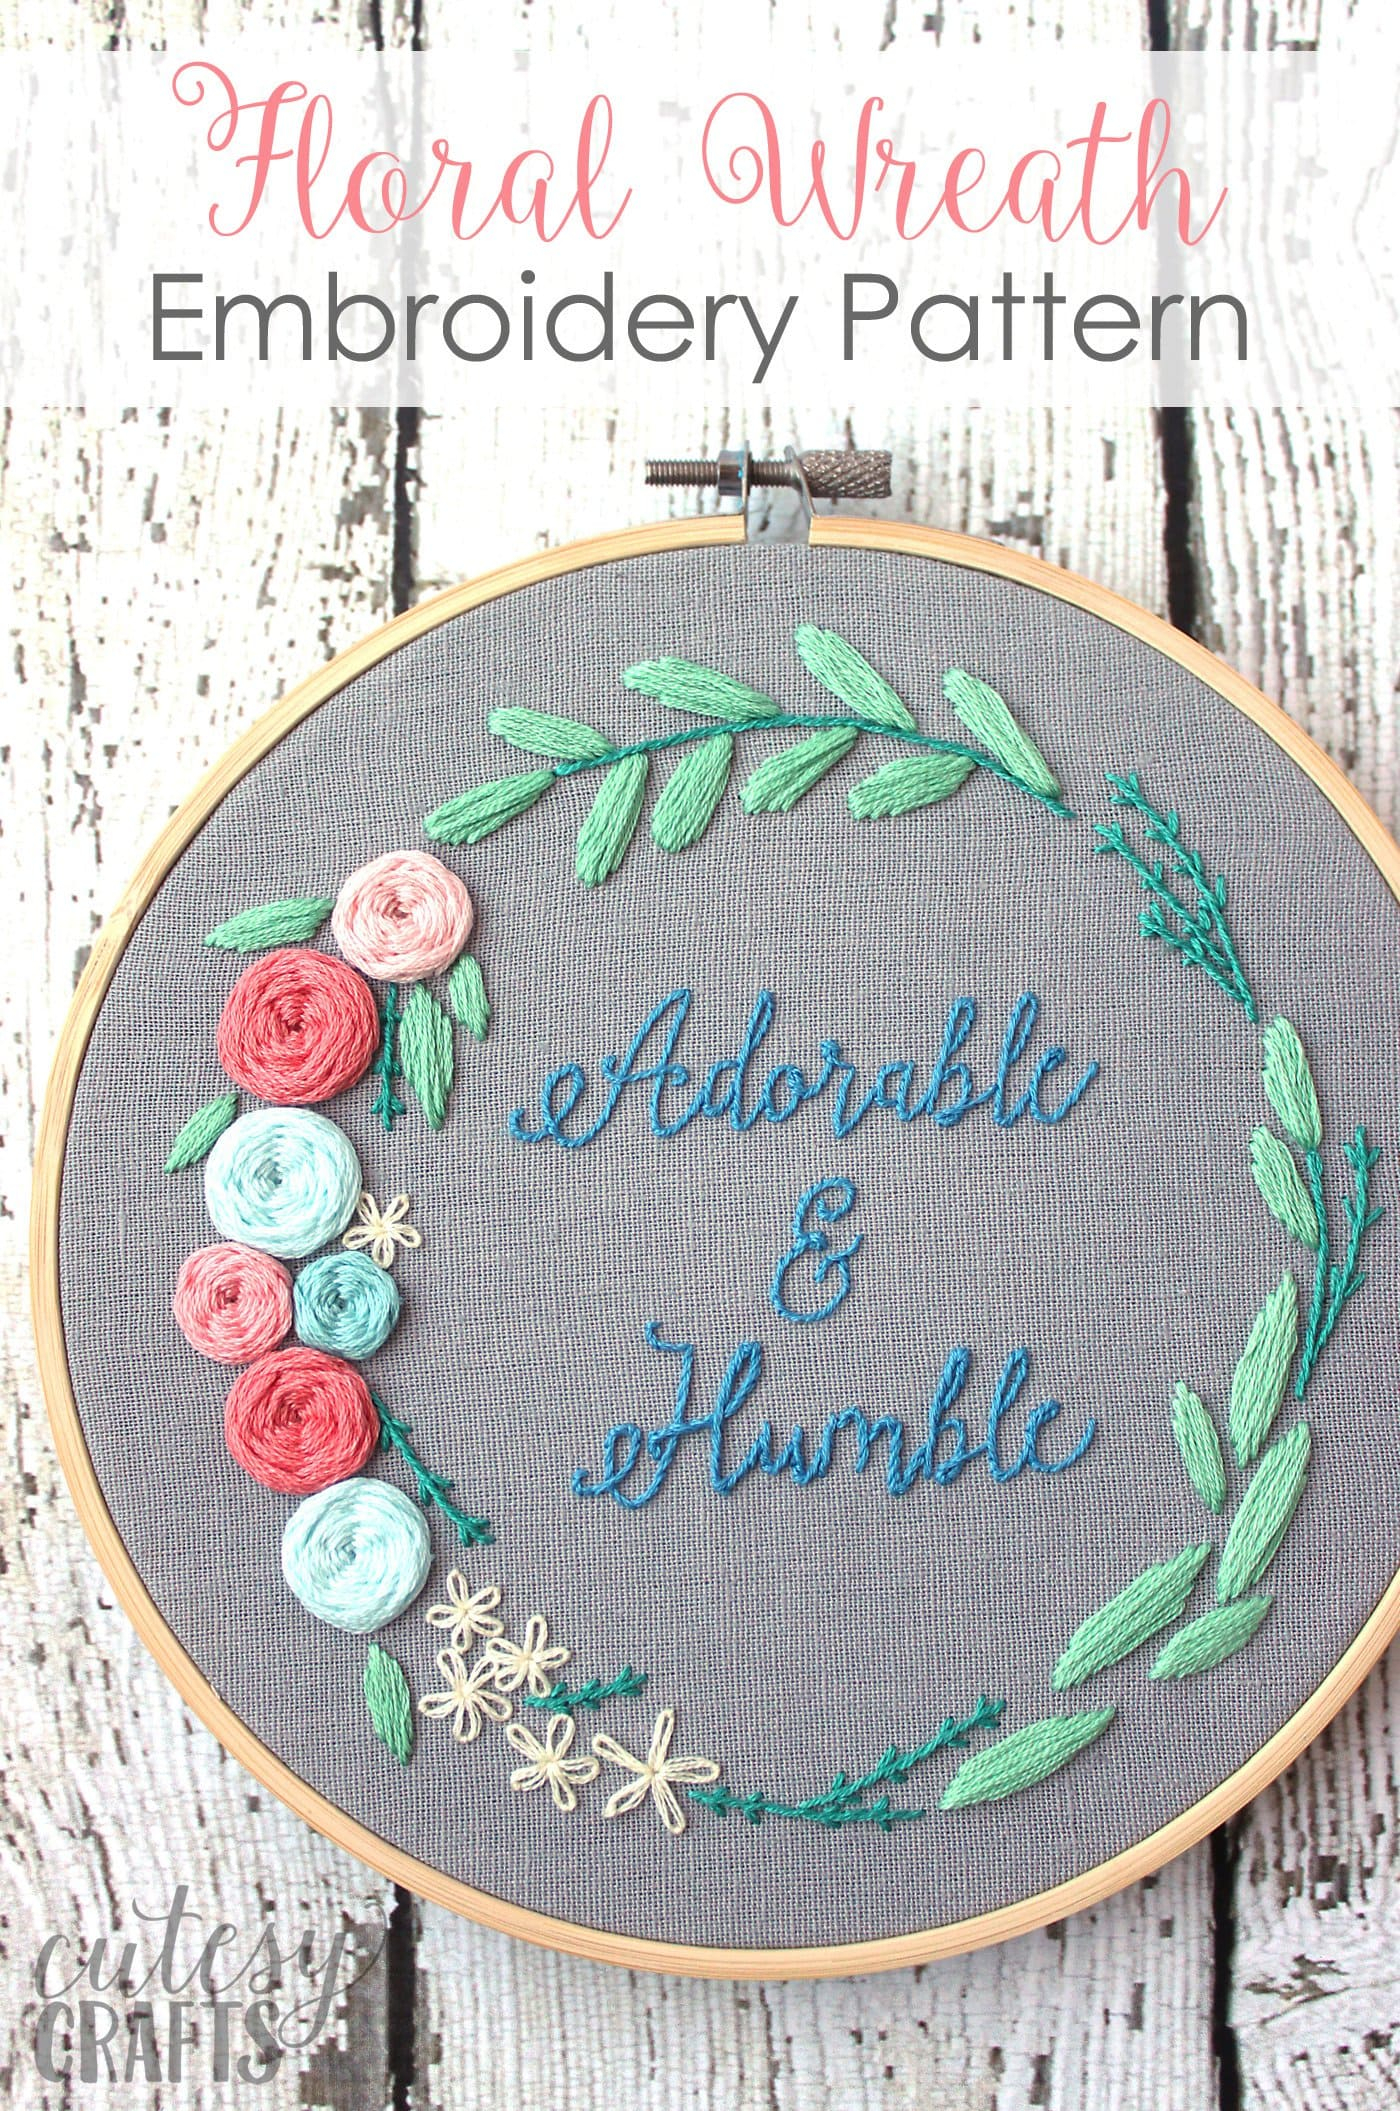 Free Hand Embroidery Patterns Adorable And Humble Free Floral Wreath Hand Embroidery Pattern